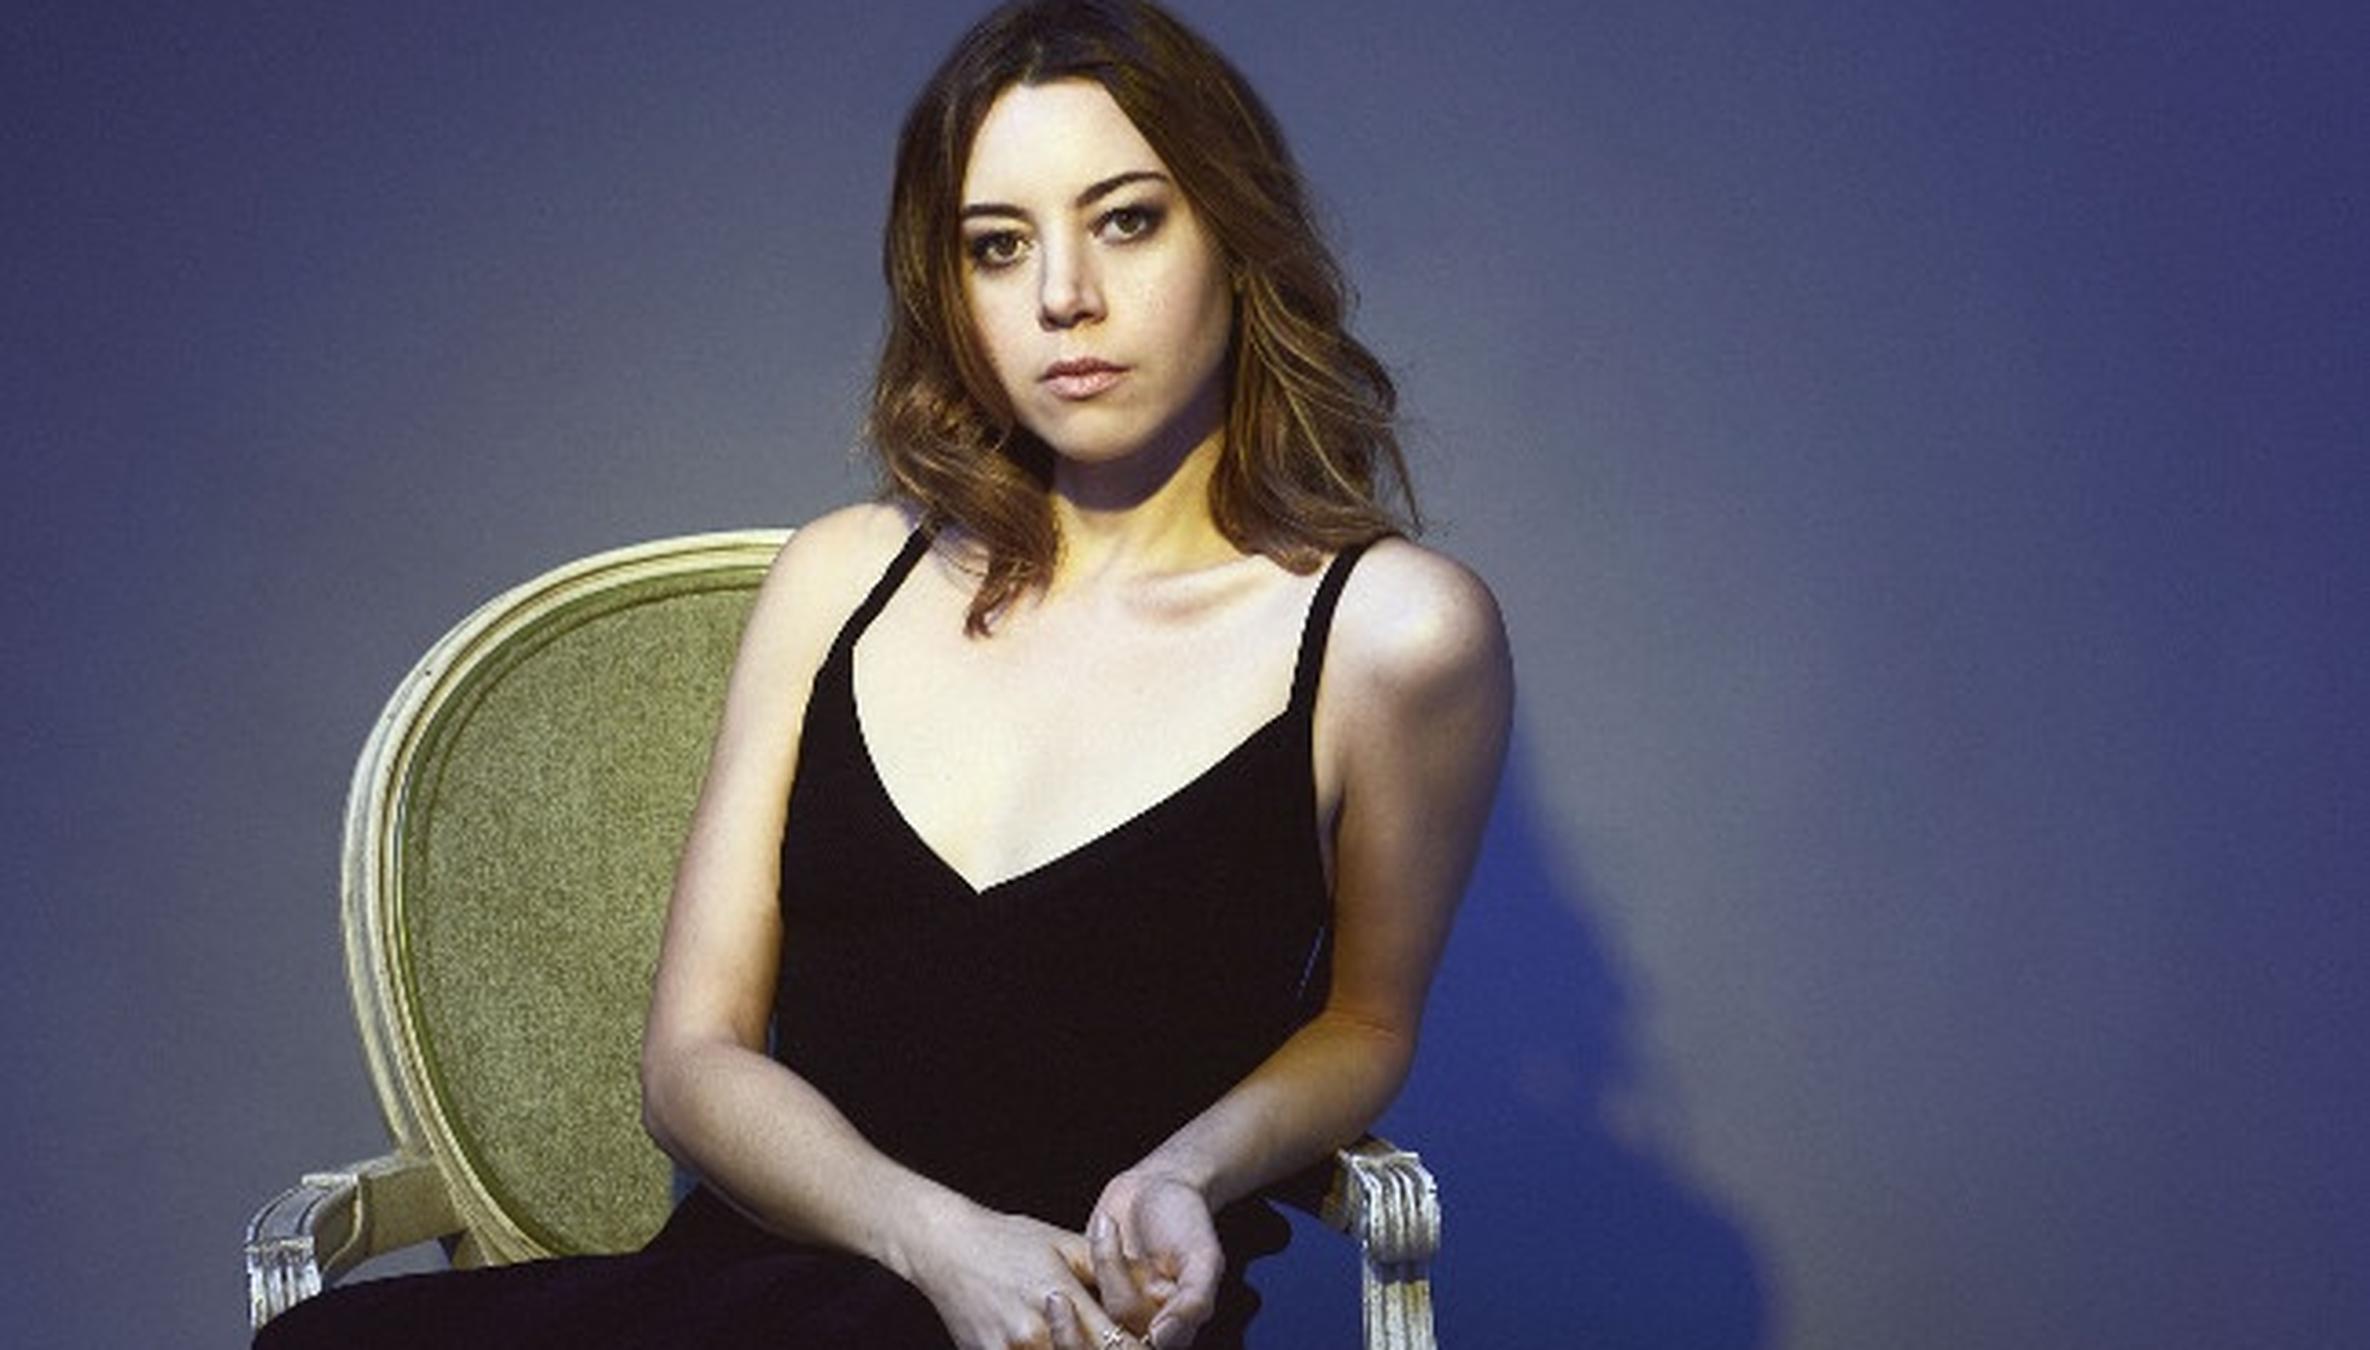 Aubrey Plaza Earned 3 Roles That Made Her Famous in a Single Week